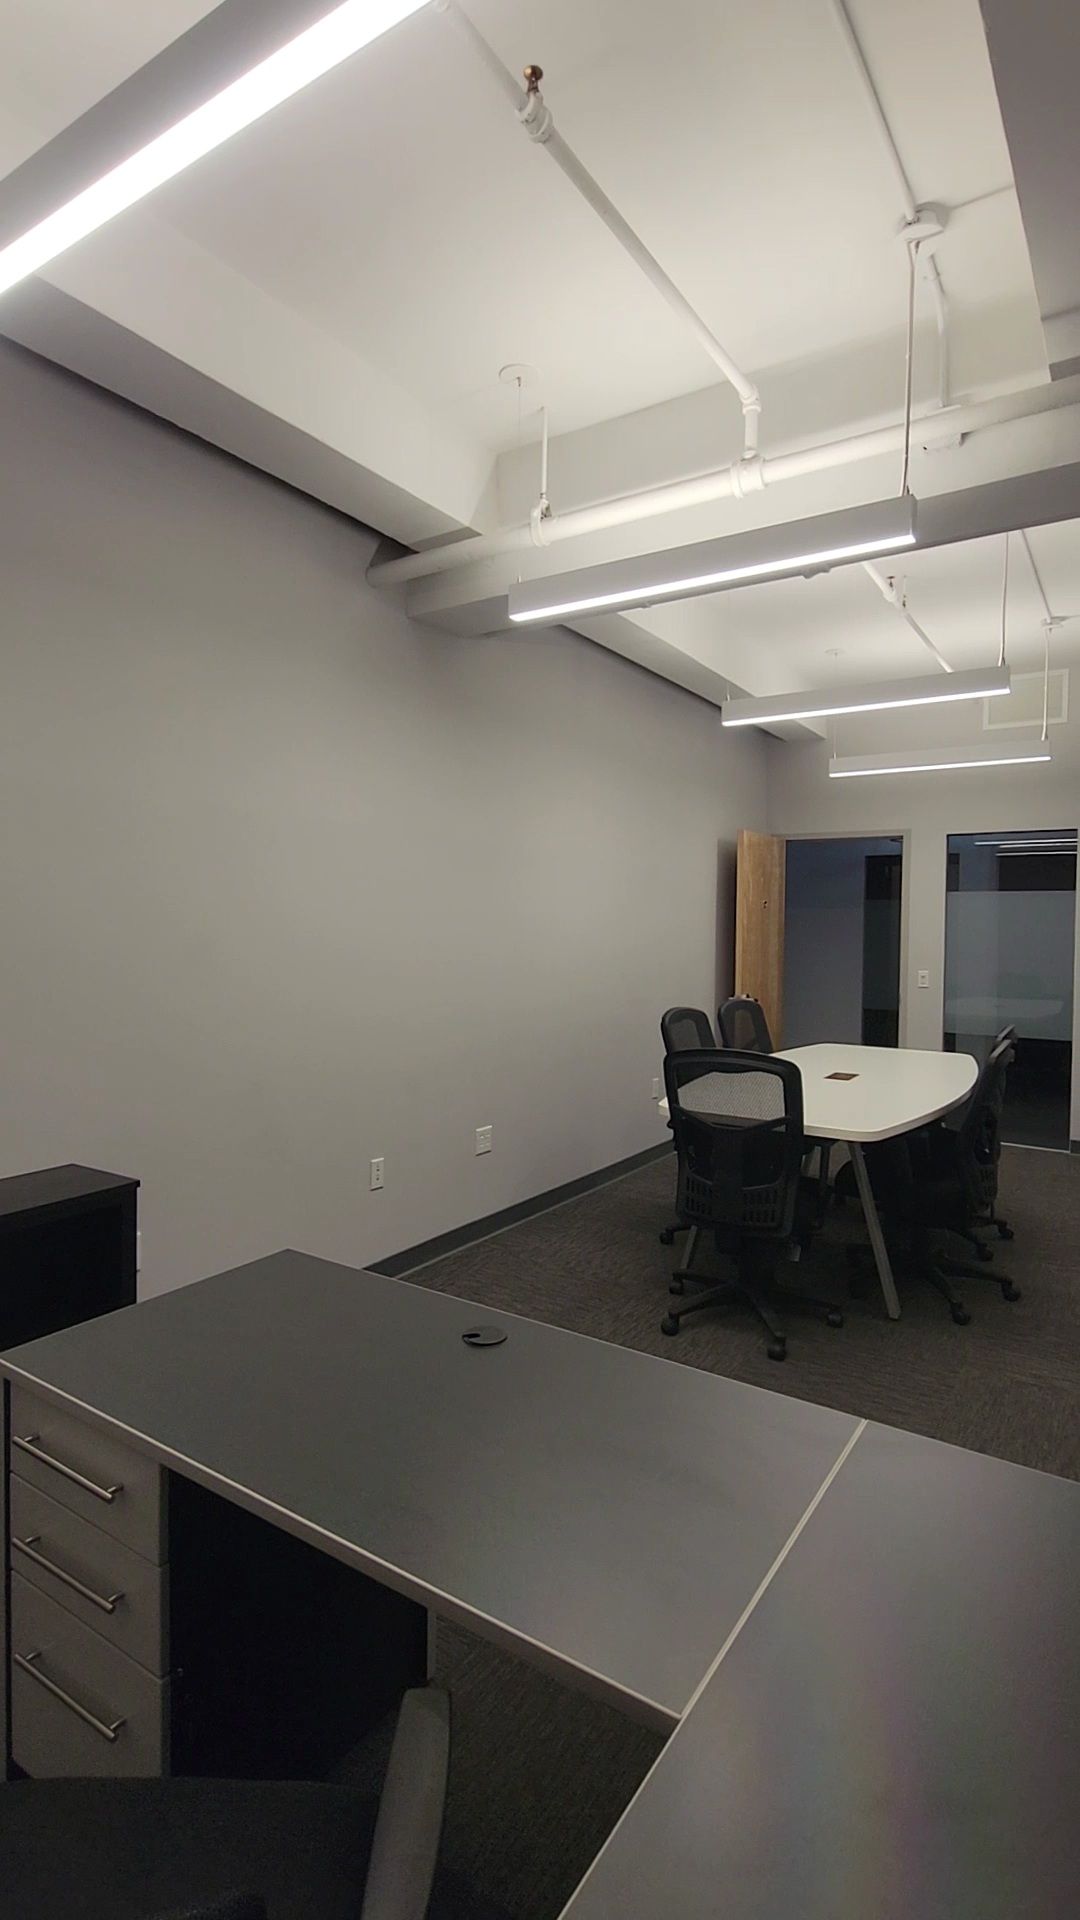 Get More Done in Your Private Office Space with Team Meeting Area